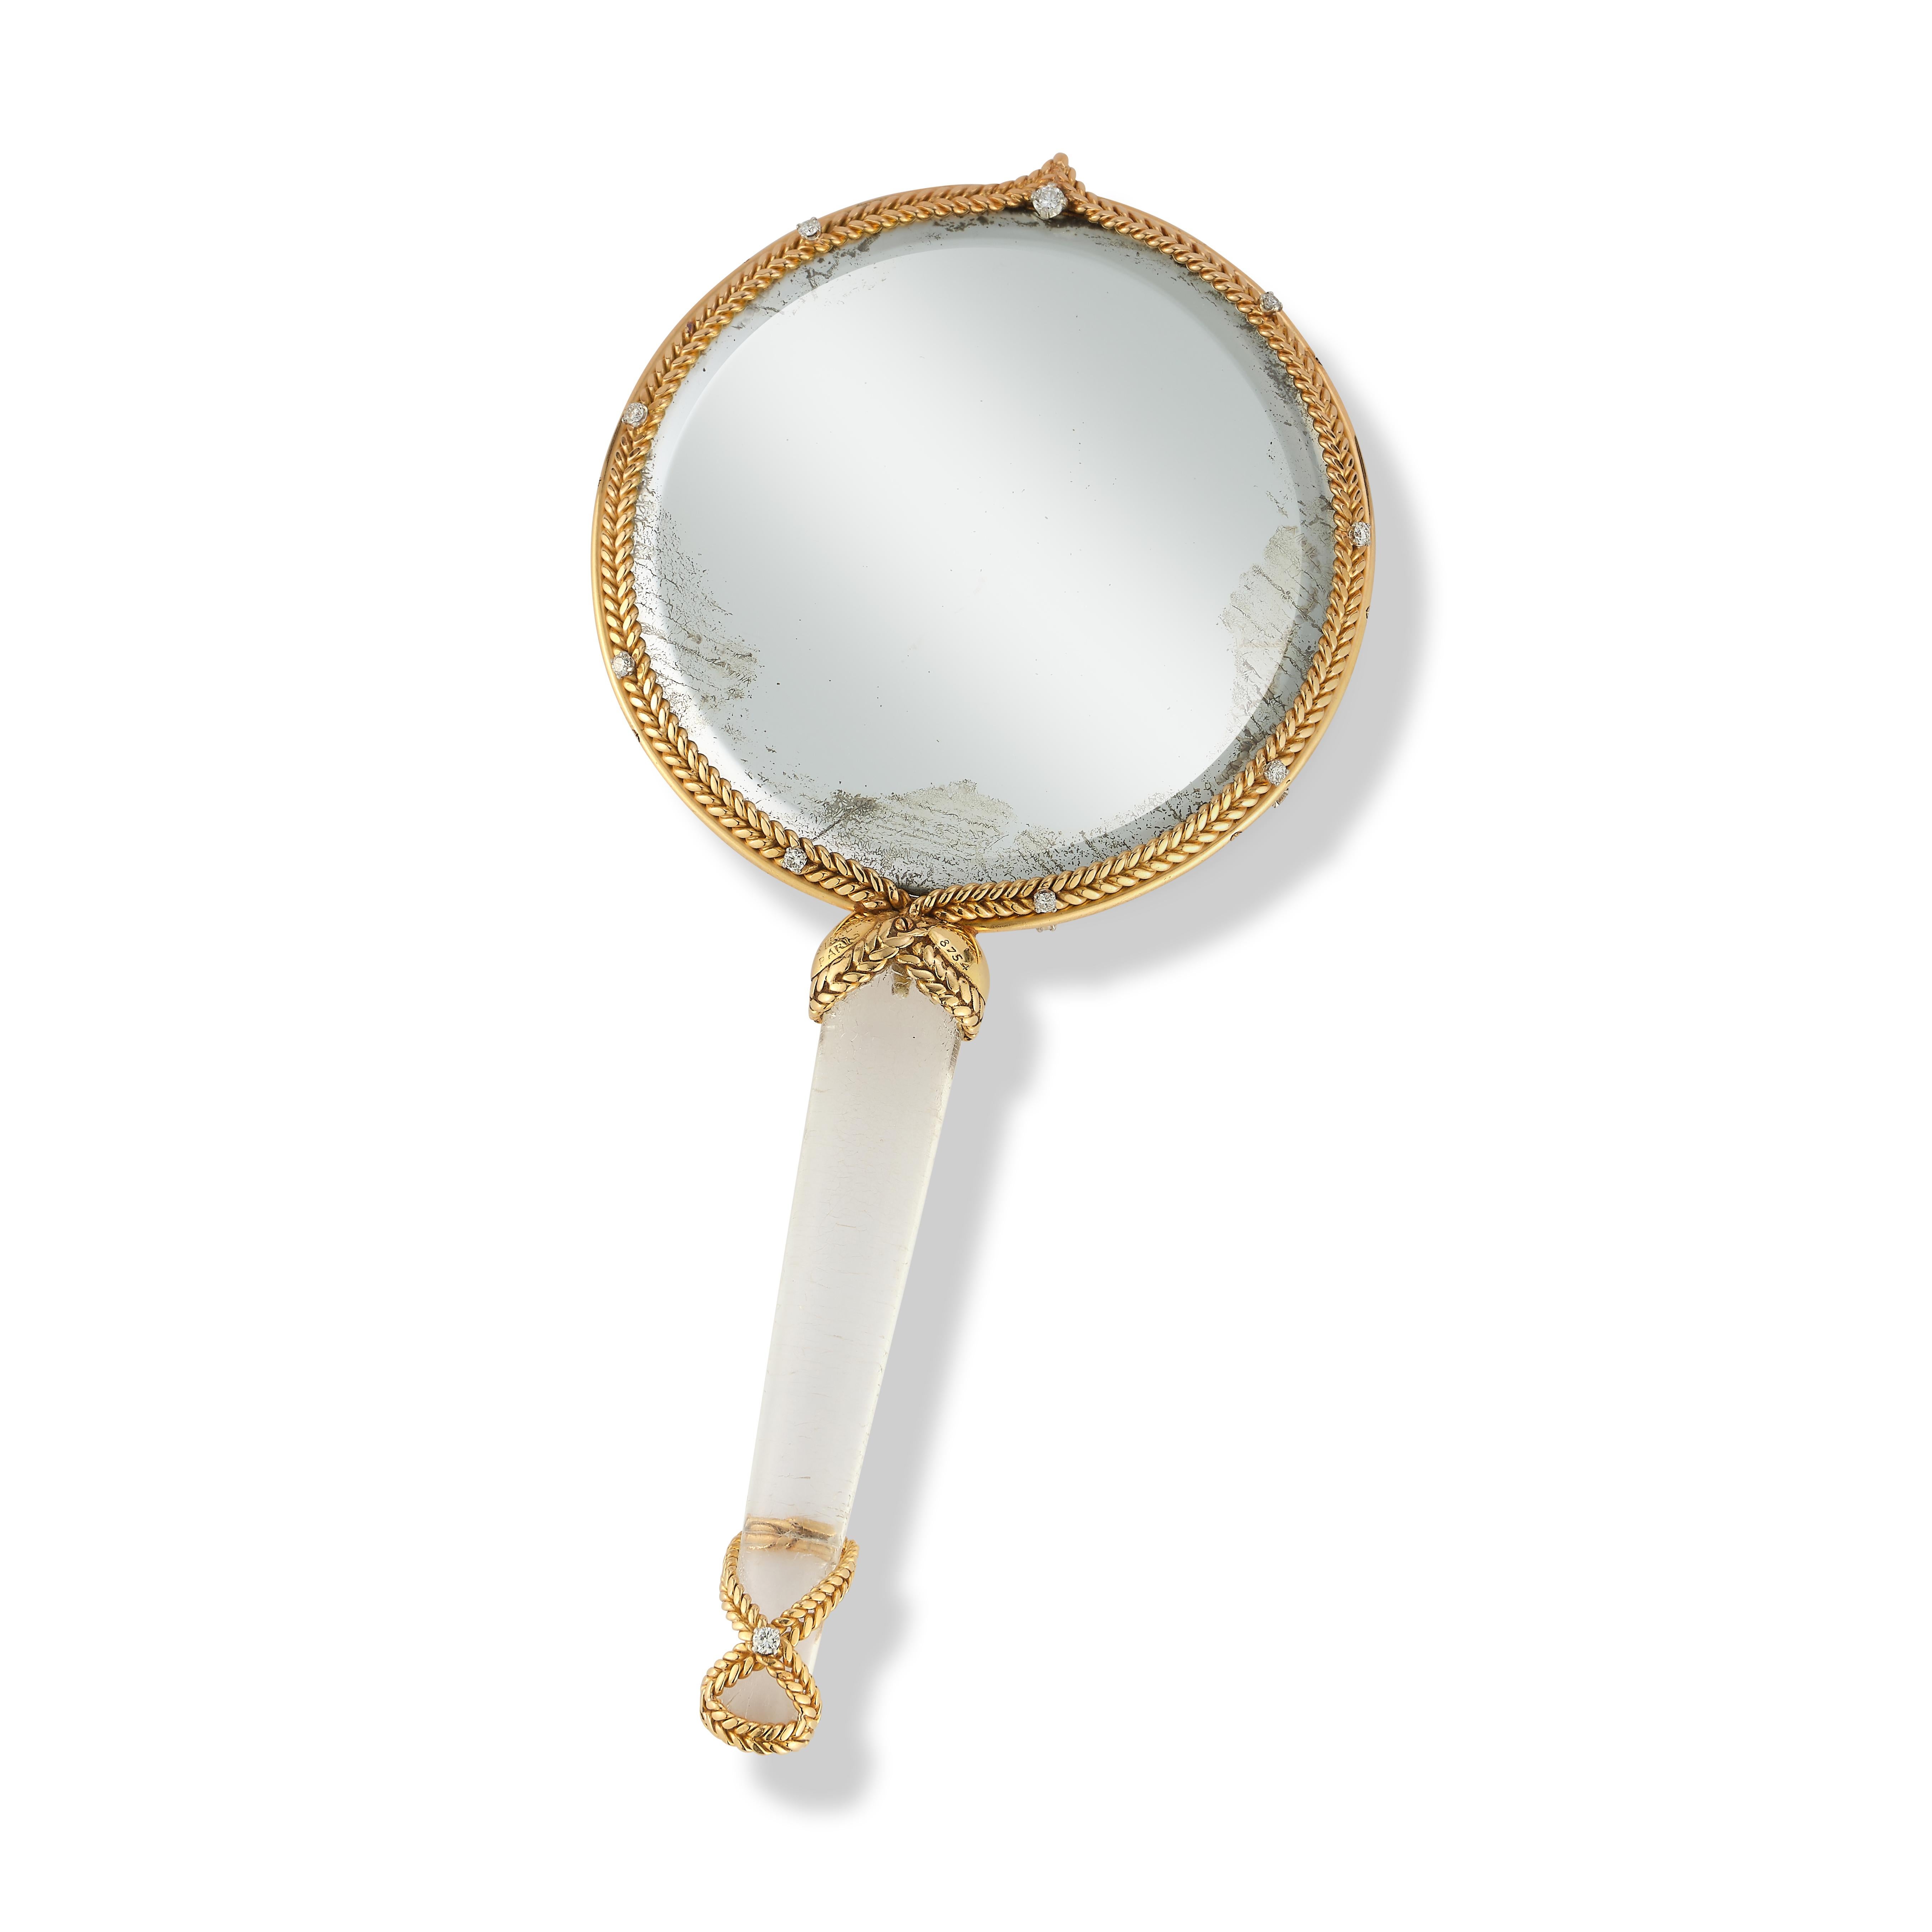 Sterle Gold Hand Mirror

A double sided mirror with an acrylic handle set in 14 karat gold accented by 19 round diamonds

Signed Sterle Paris and numbered

Circa 1960

Measurements: 6.5